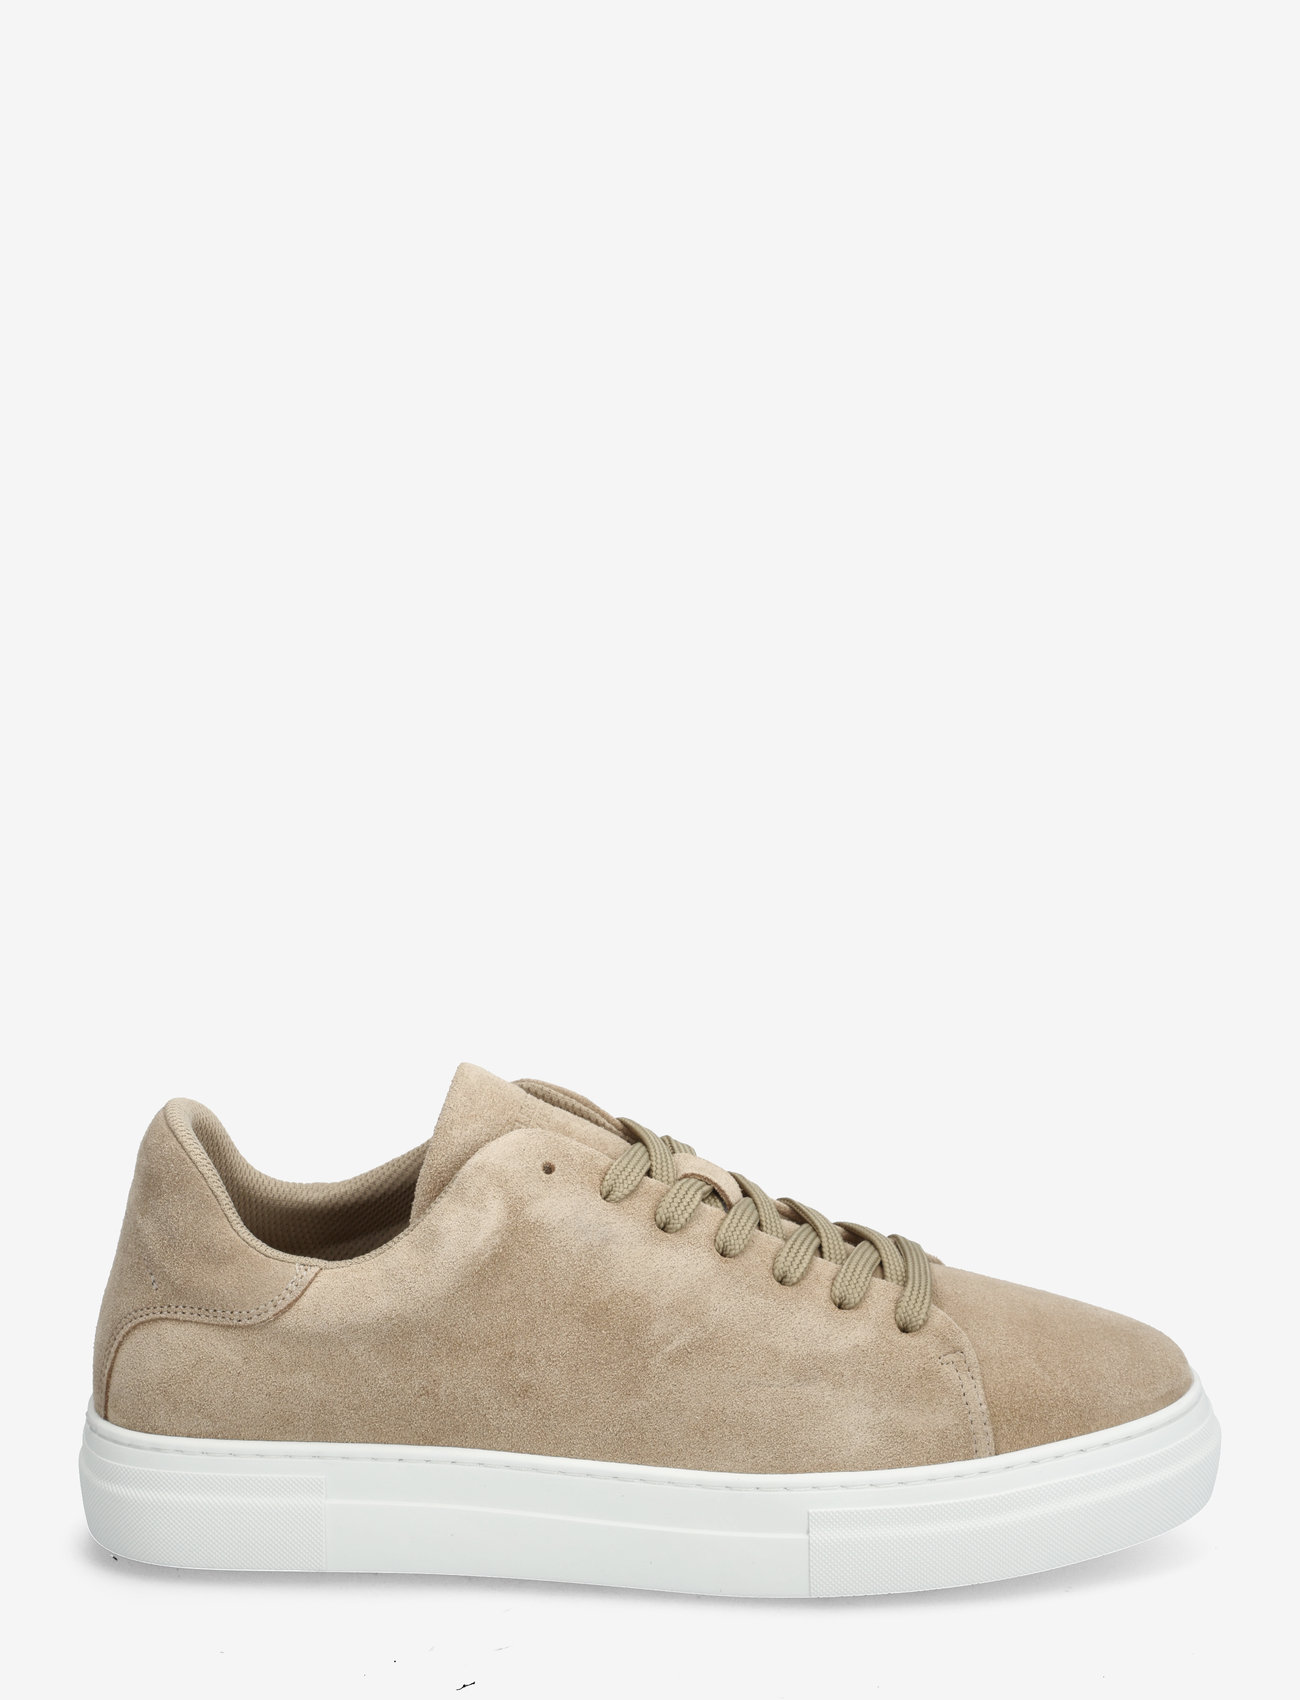 Selected Homme - SLHDAVID CHUNKY CLEAN SUEDE TRAINER B - låga sneakers - sand - 1